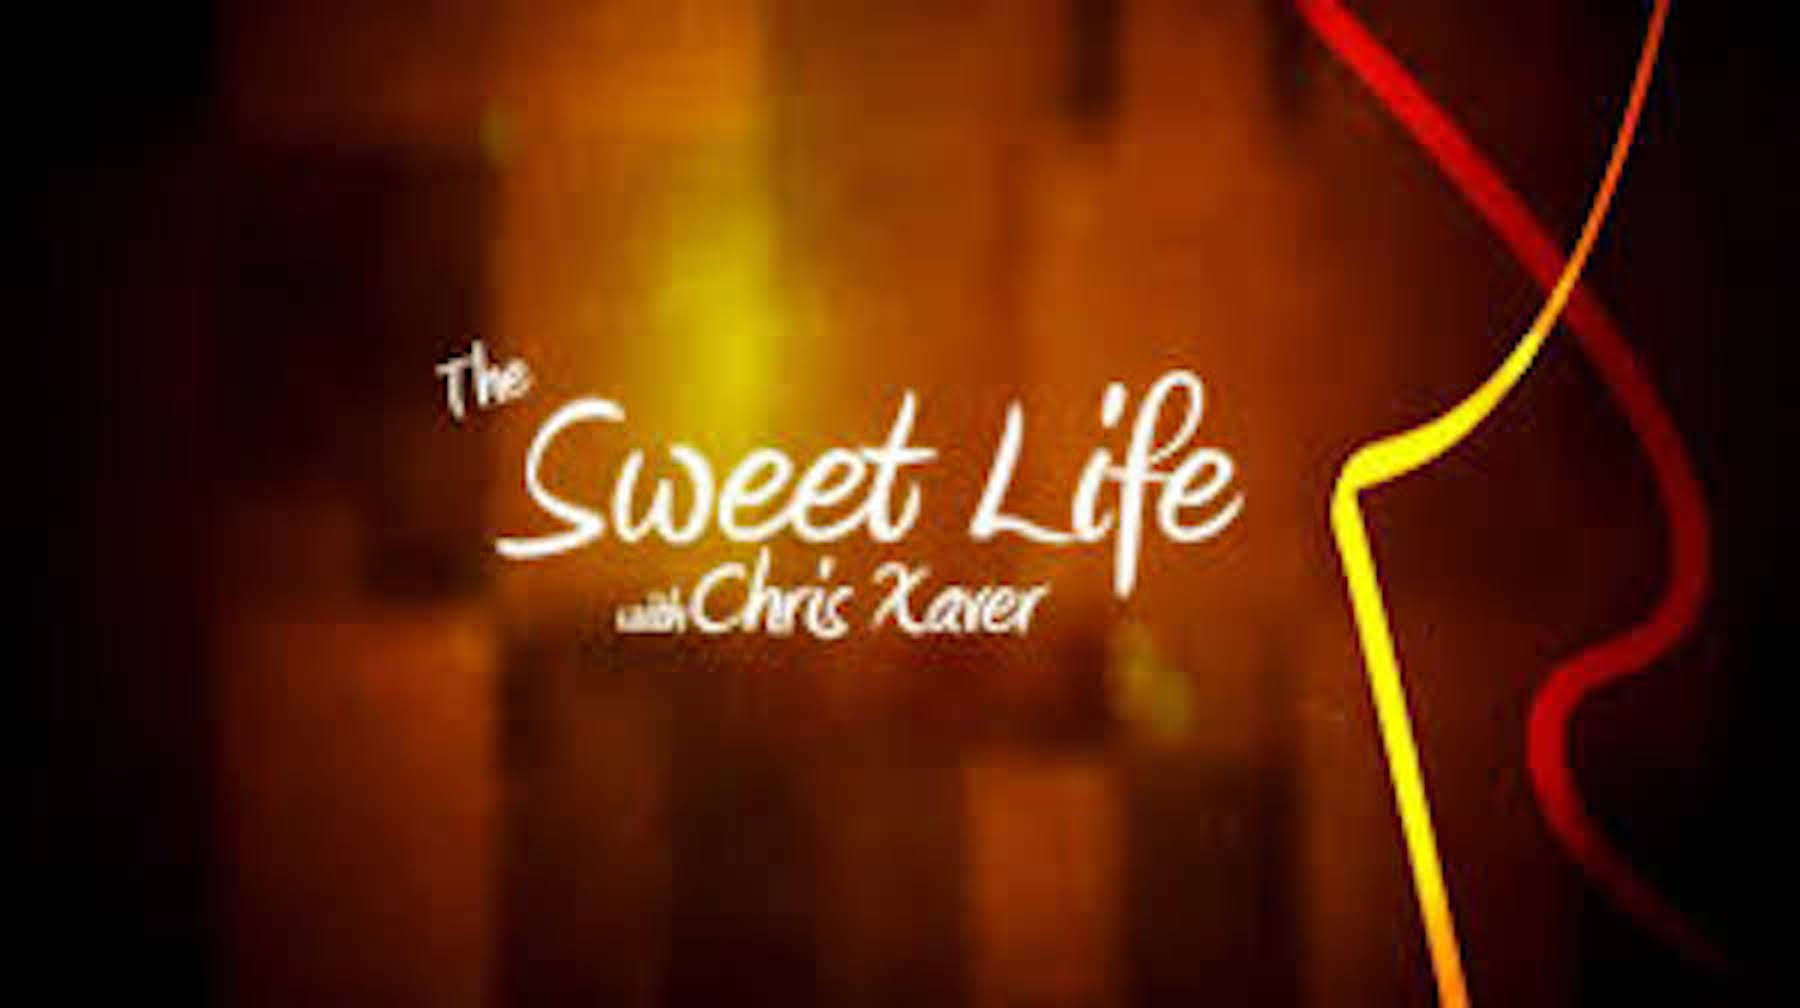 The Sweet Life with Chris Xaver